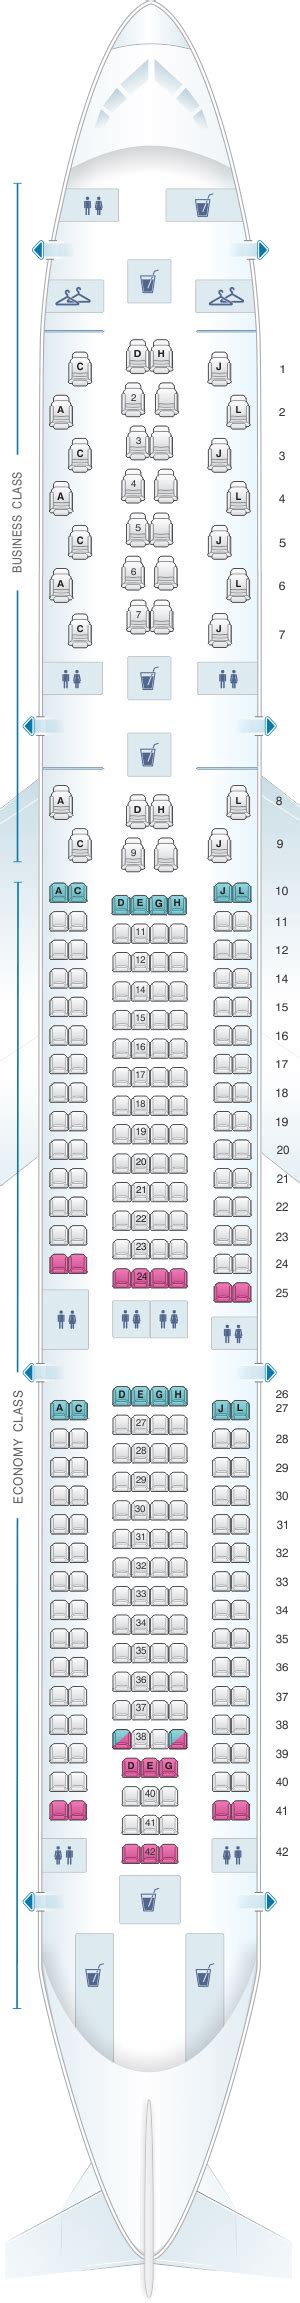 Iberia Airlines A330 300 Seat Map